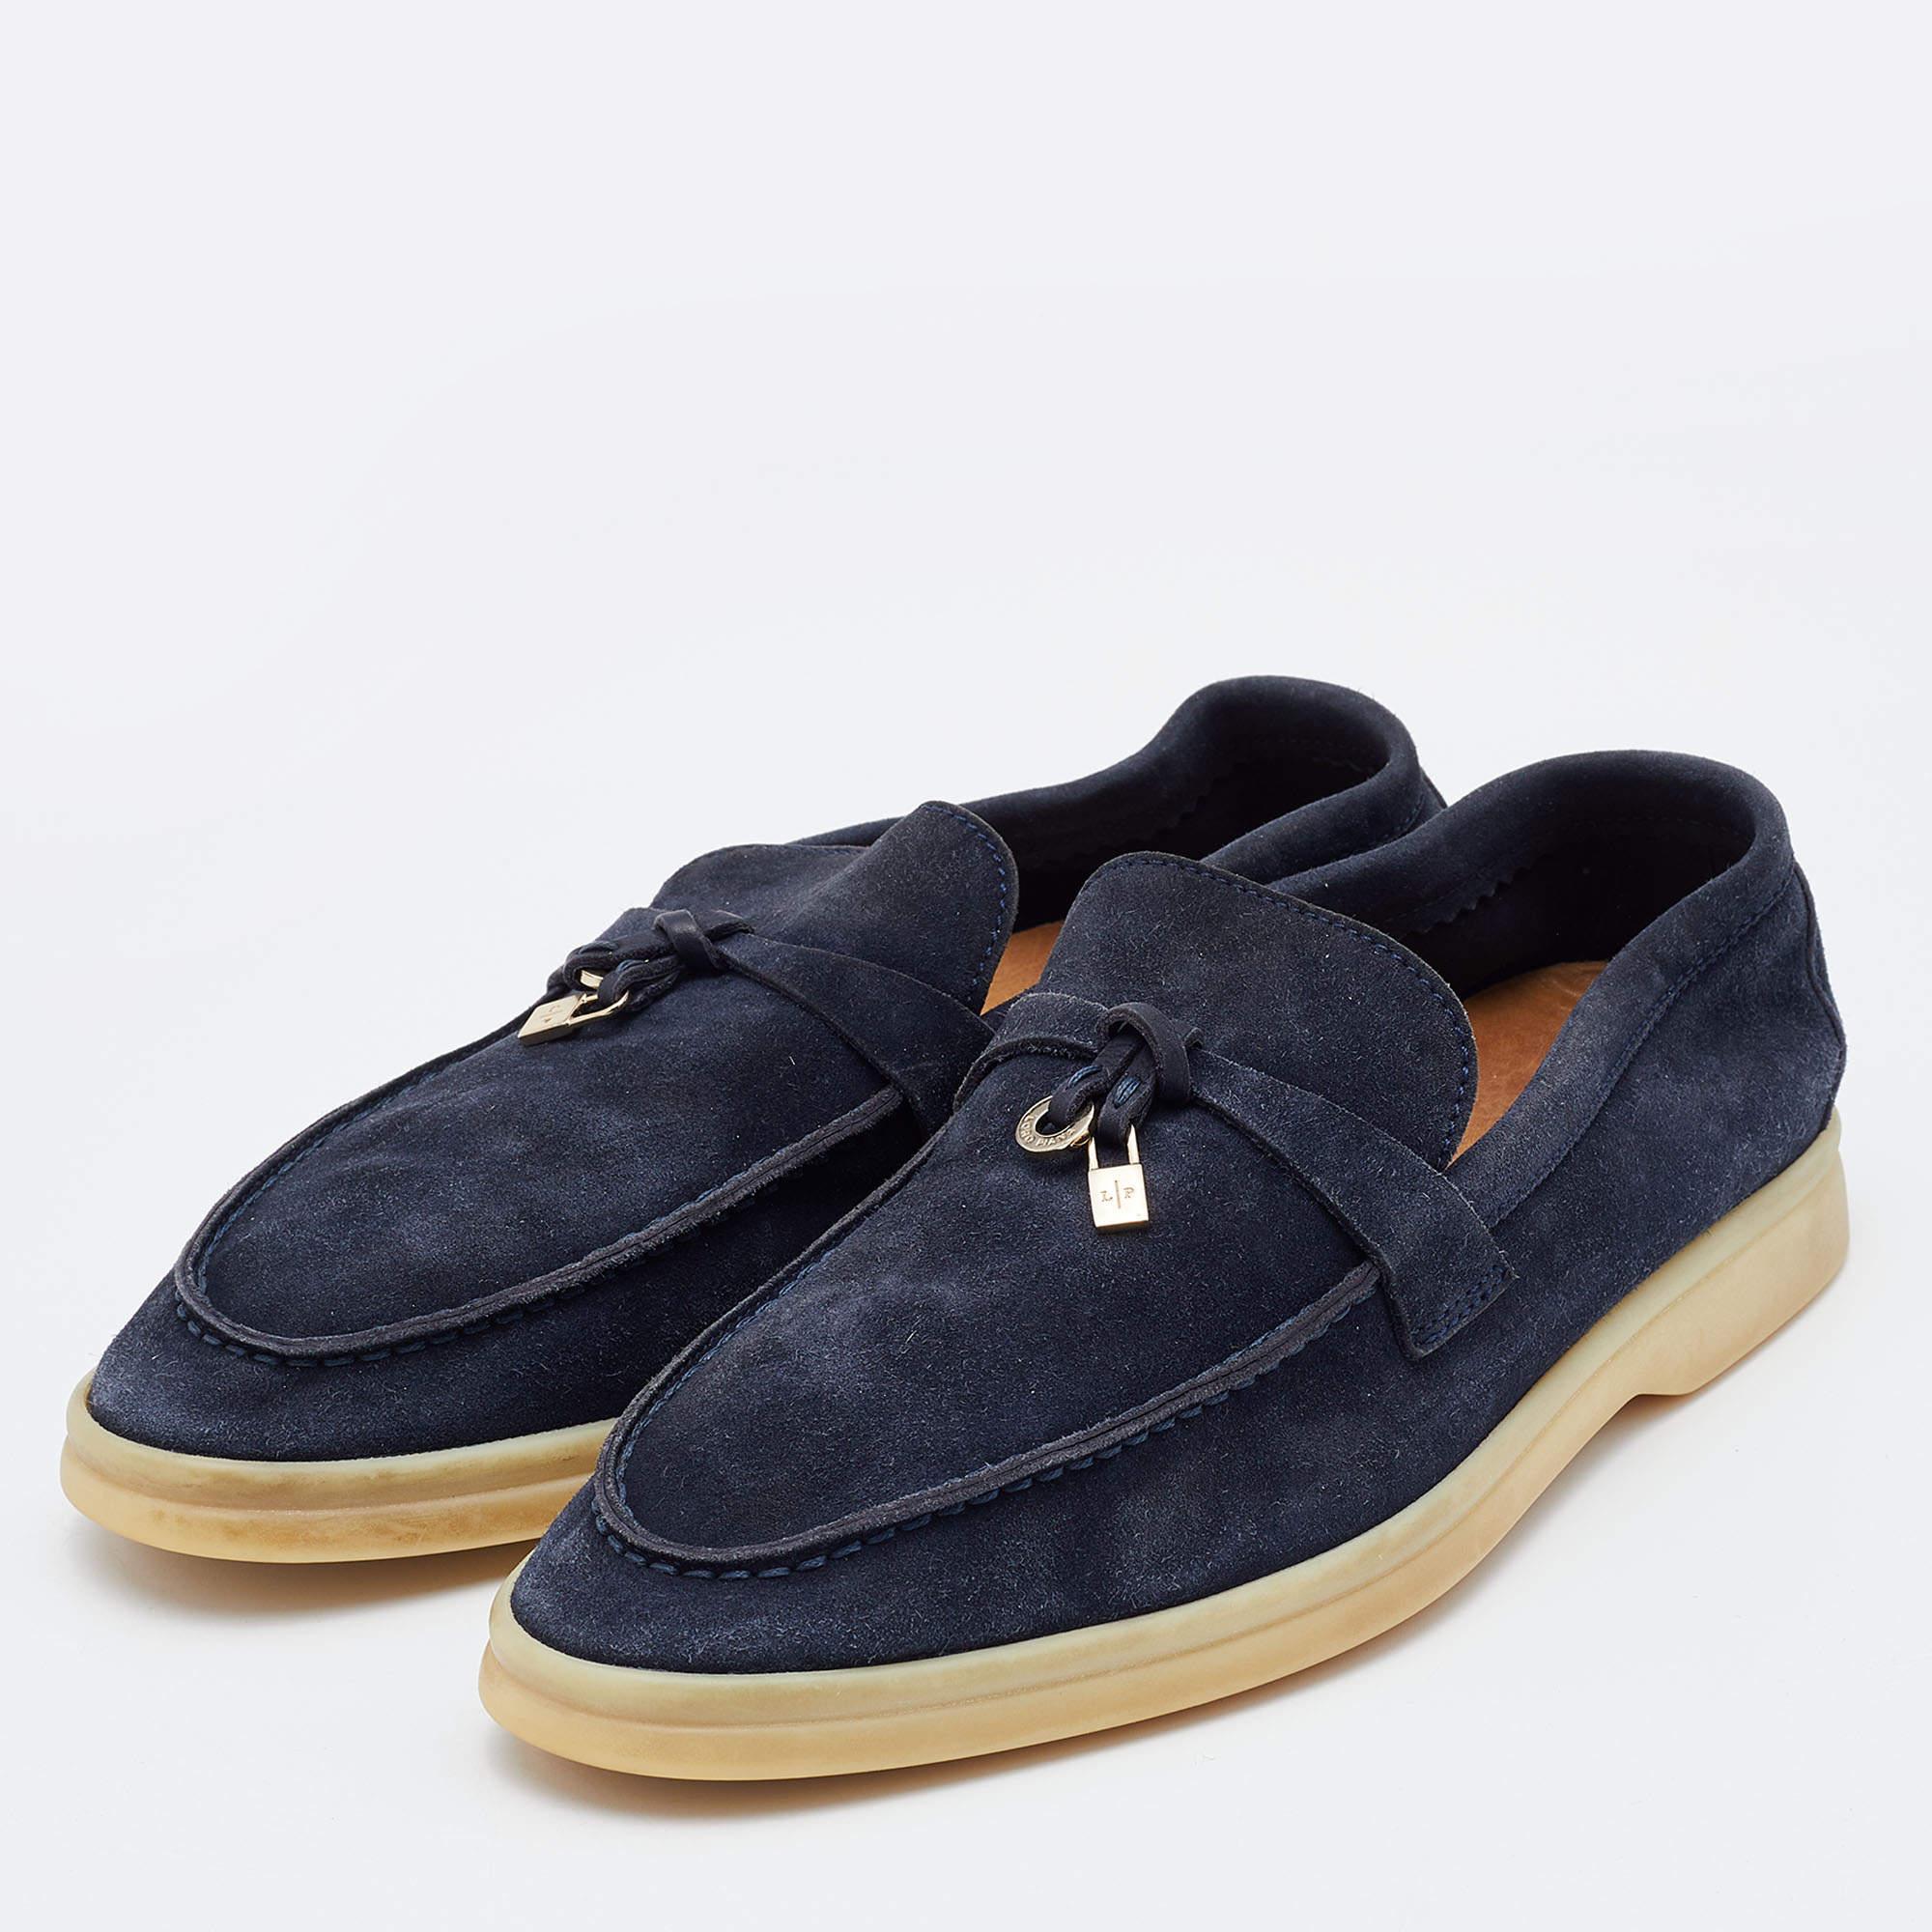 These blue loafers from Loro Piana are crafted from suede into a neat design. They flaunt round toes, silver-tone charms on the vamps, comfortably lined insoles, and durable rubber soles.

